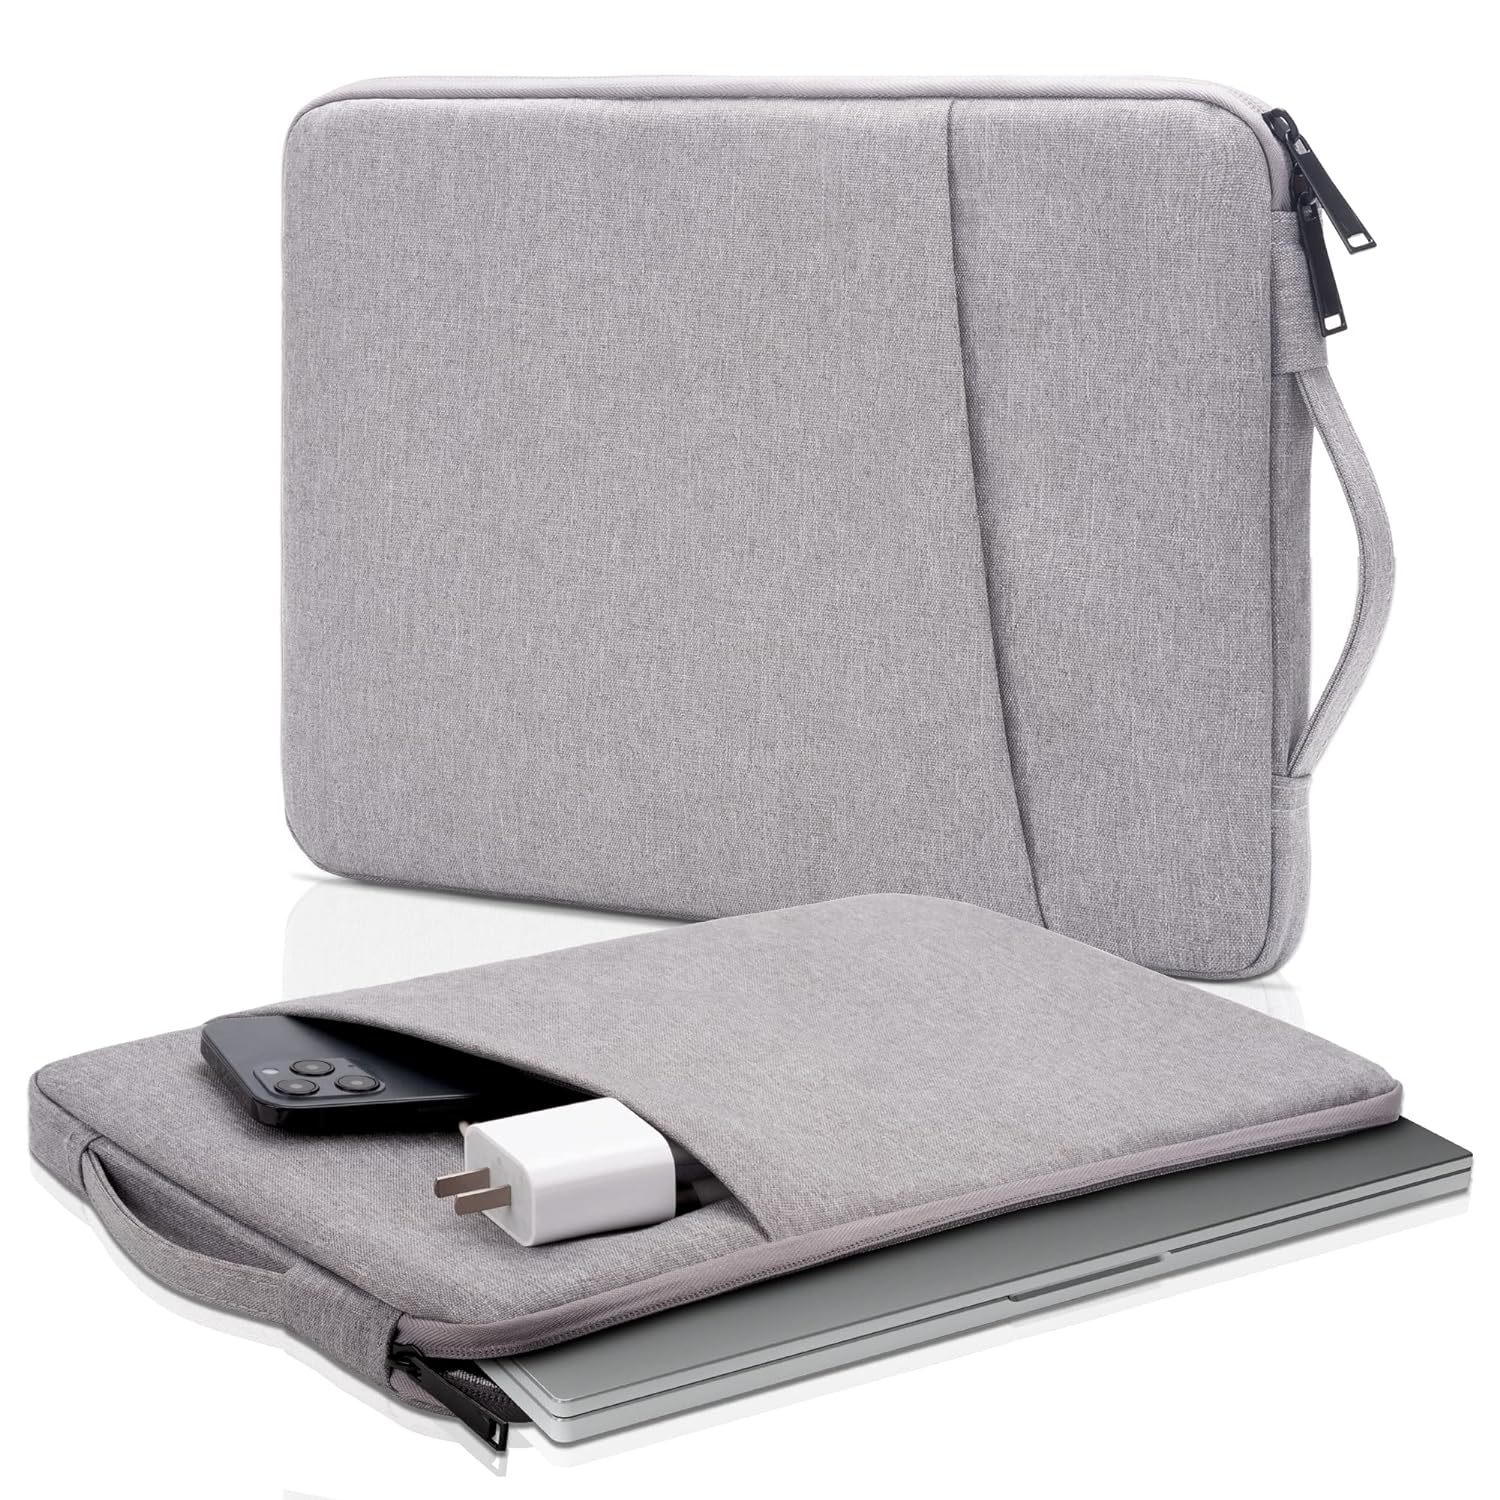 Laptop Sleeve Bag Compatible With 13 Inch Macbook Air Mac Pro M1 Surface Lenovo  - $28.49